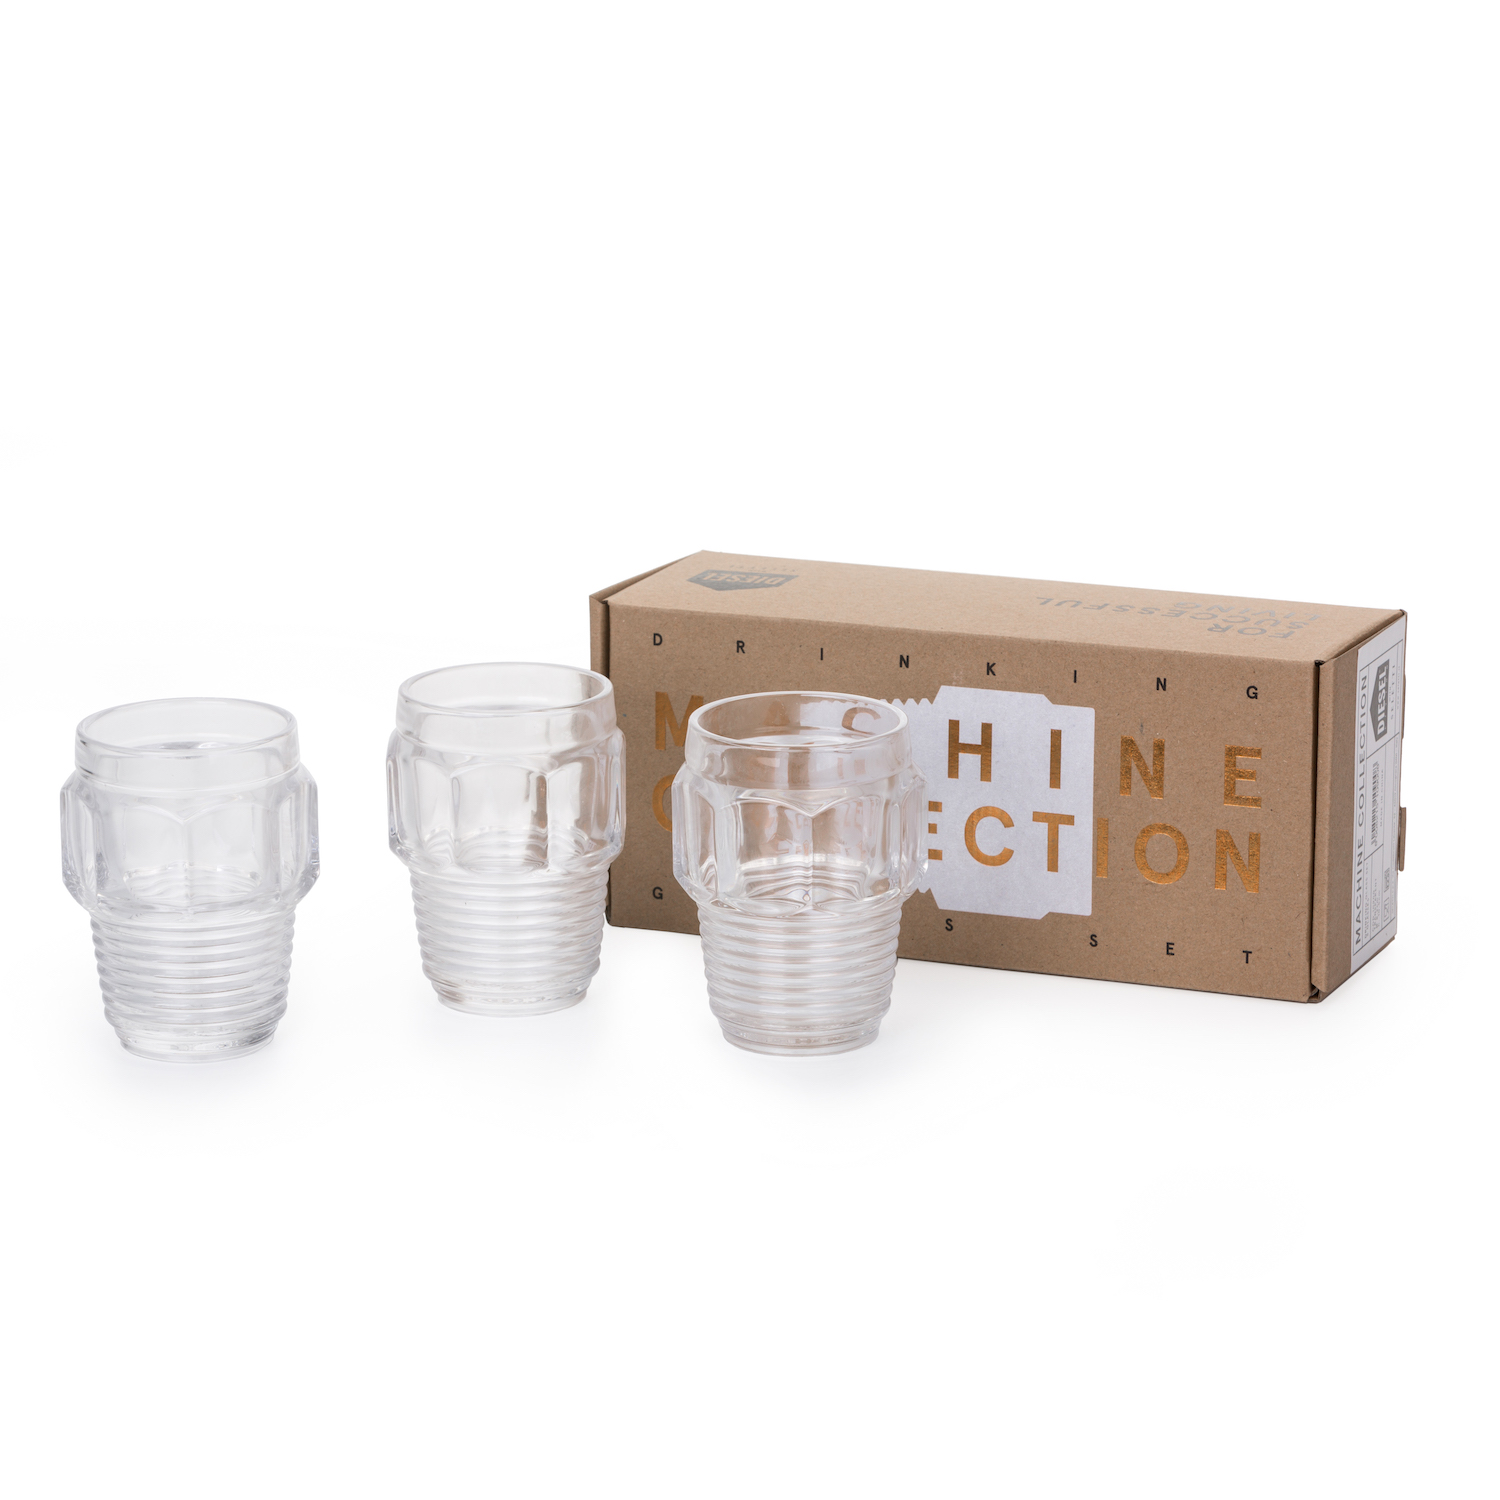 SELETTI Machine Collection Drinking glass set of 3